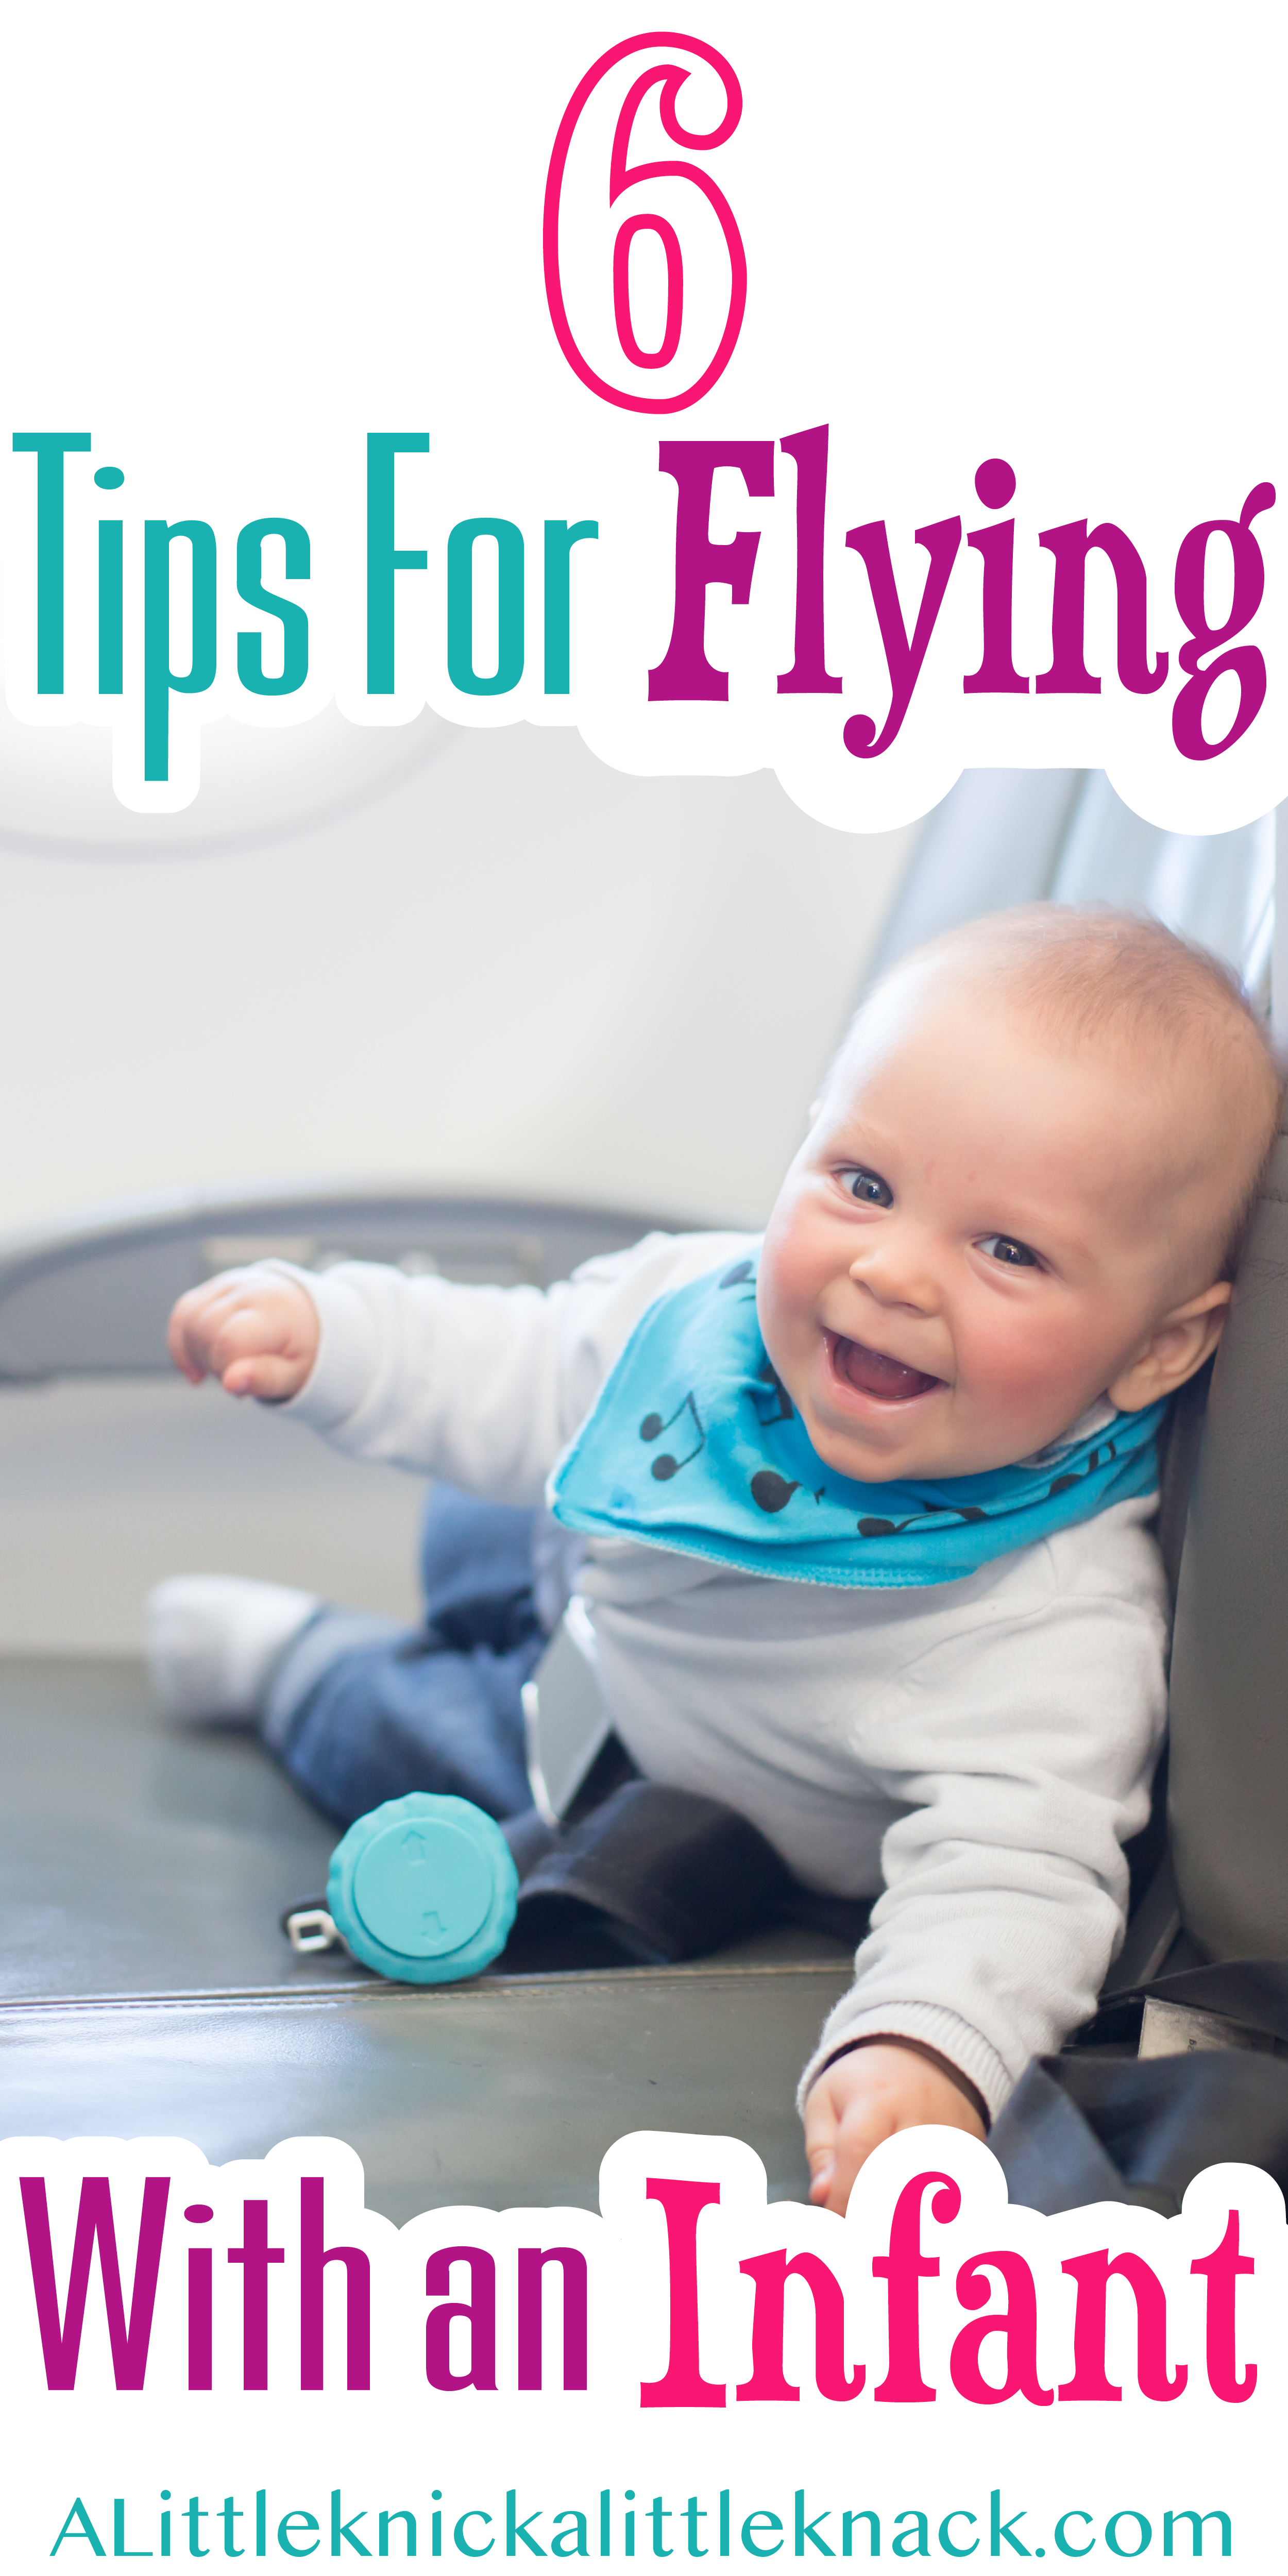 A smiling baby in an airplane seat with a text overlay